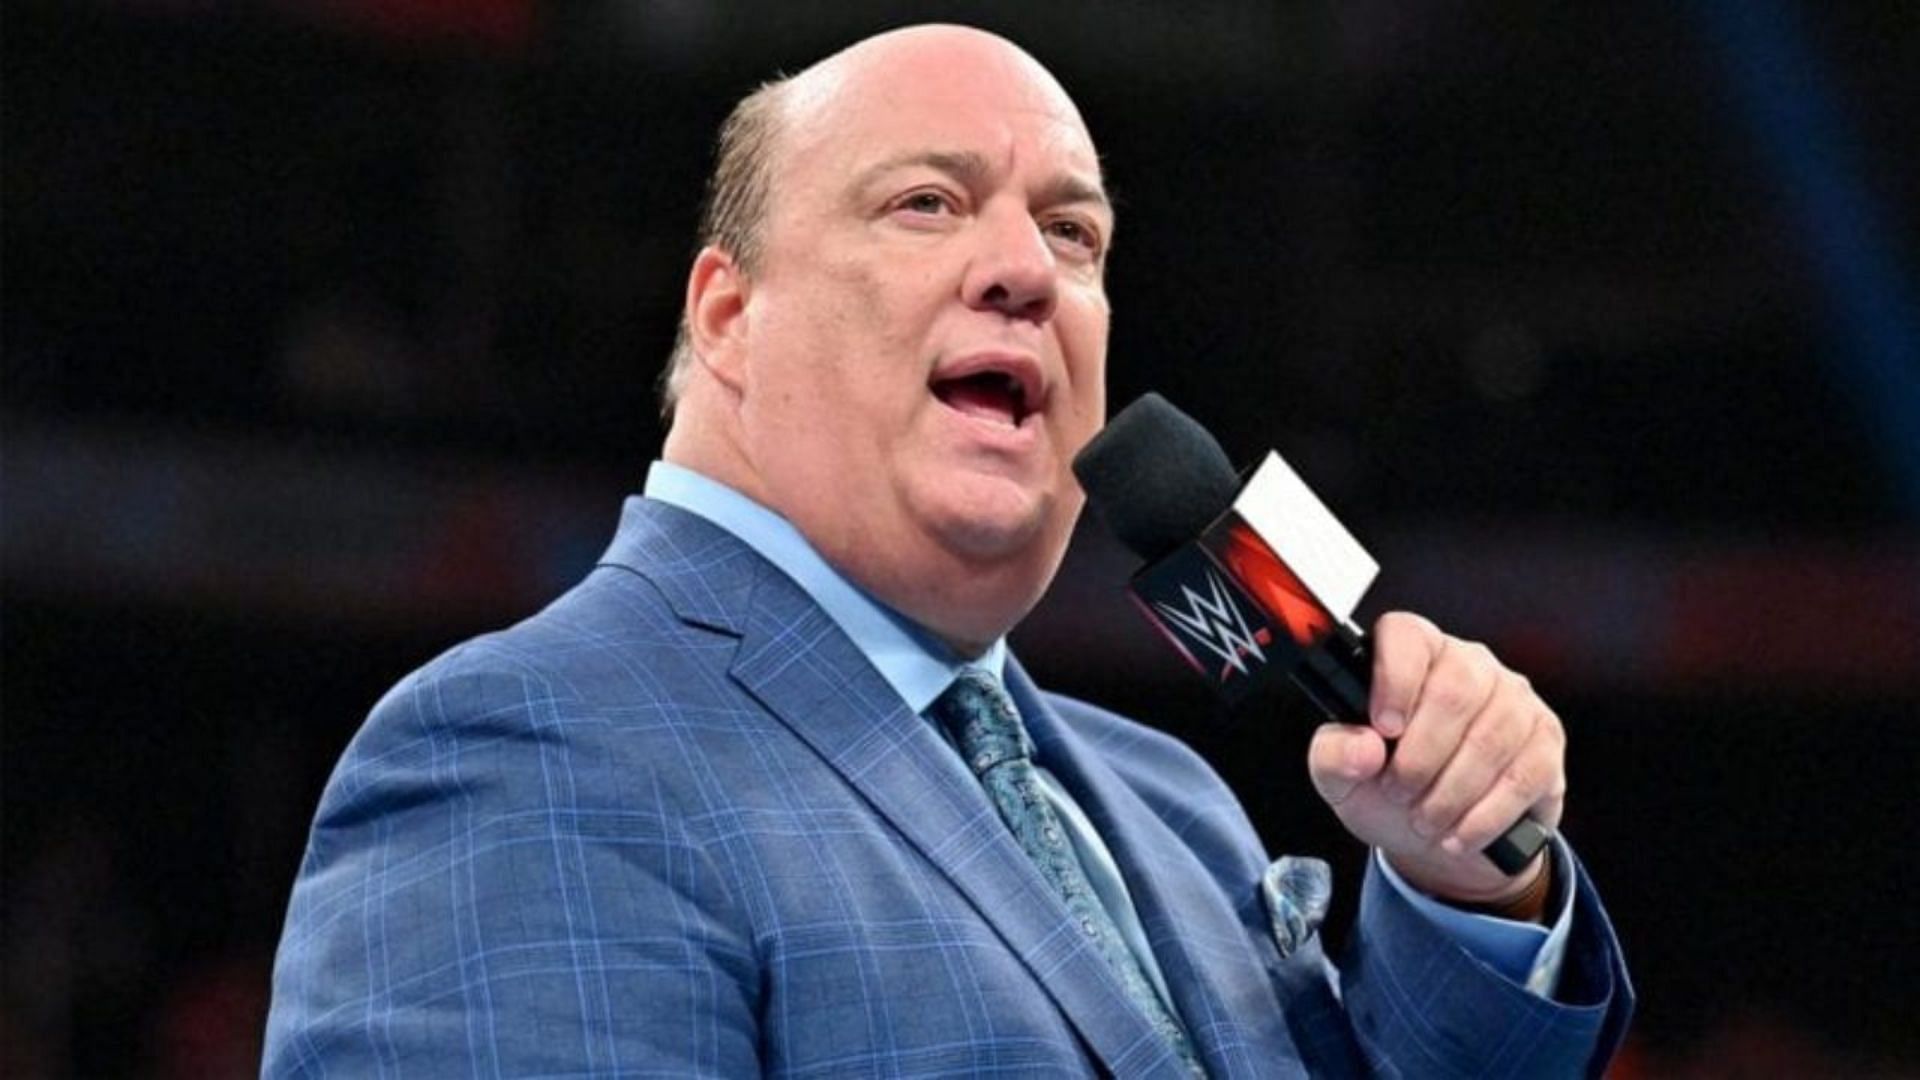 Paul Heyman is currently the special counsel to Roman Reigns.